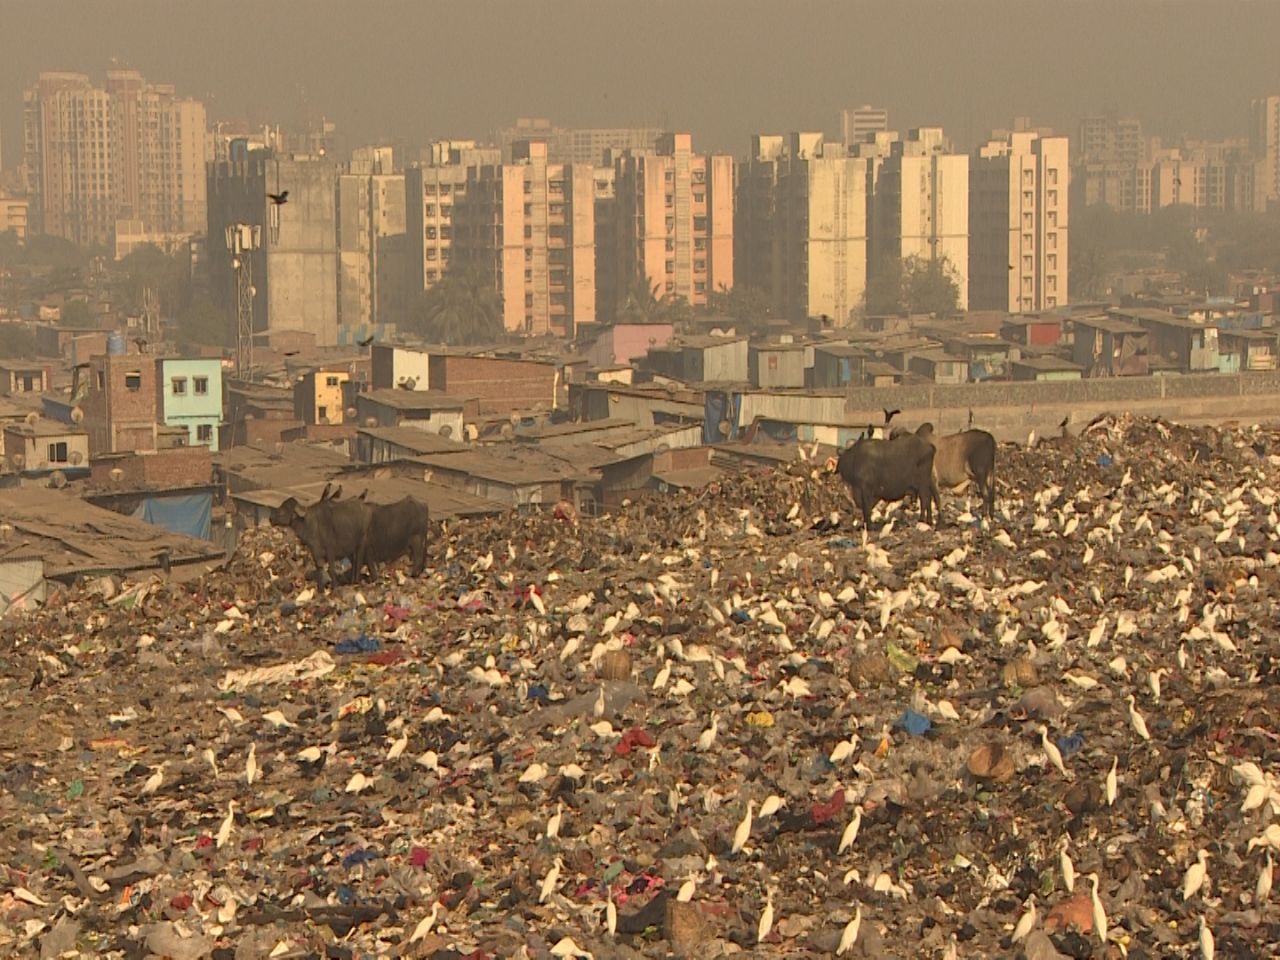 It stretches for 138 hectares and is the city's oldest trash dumping site. 